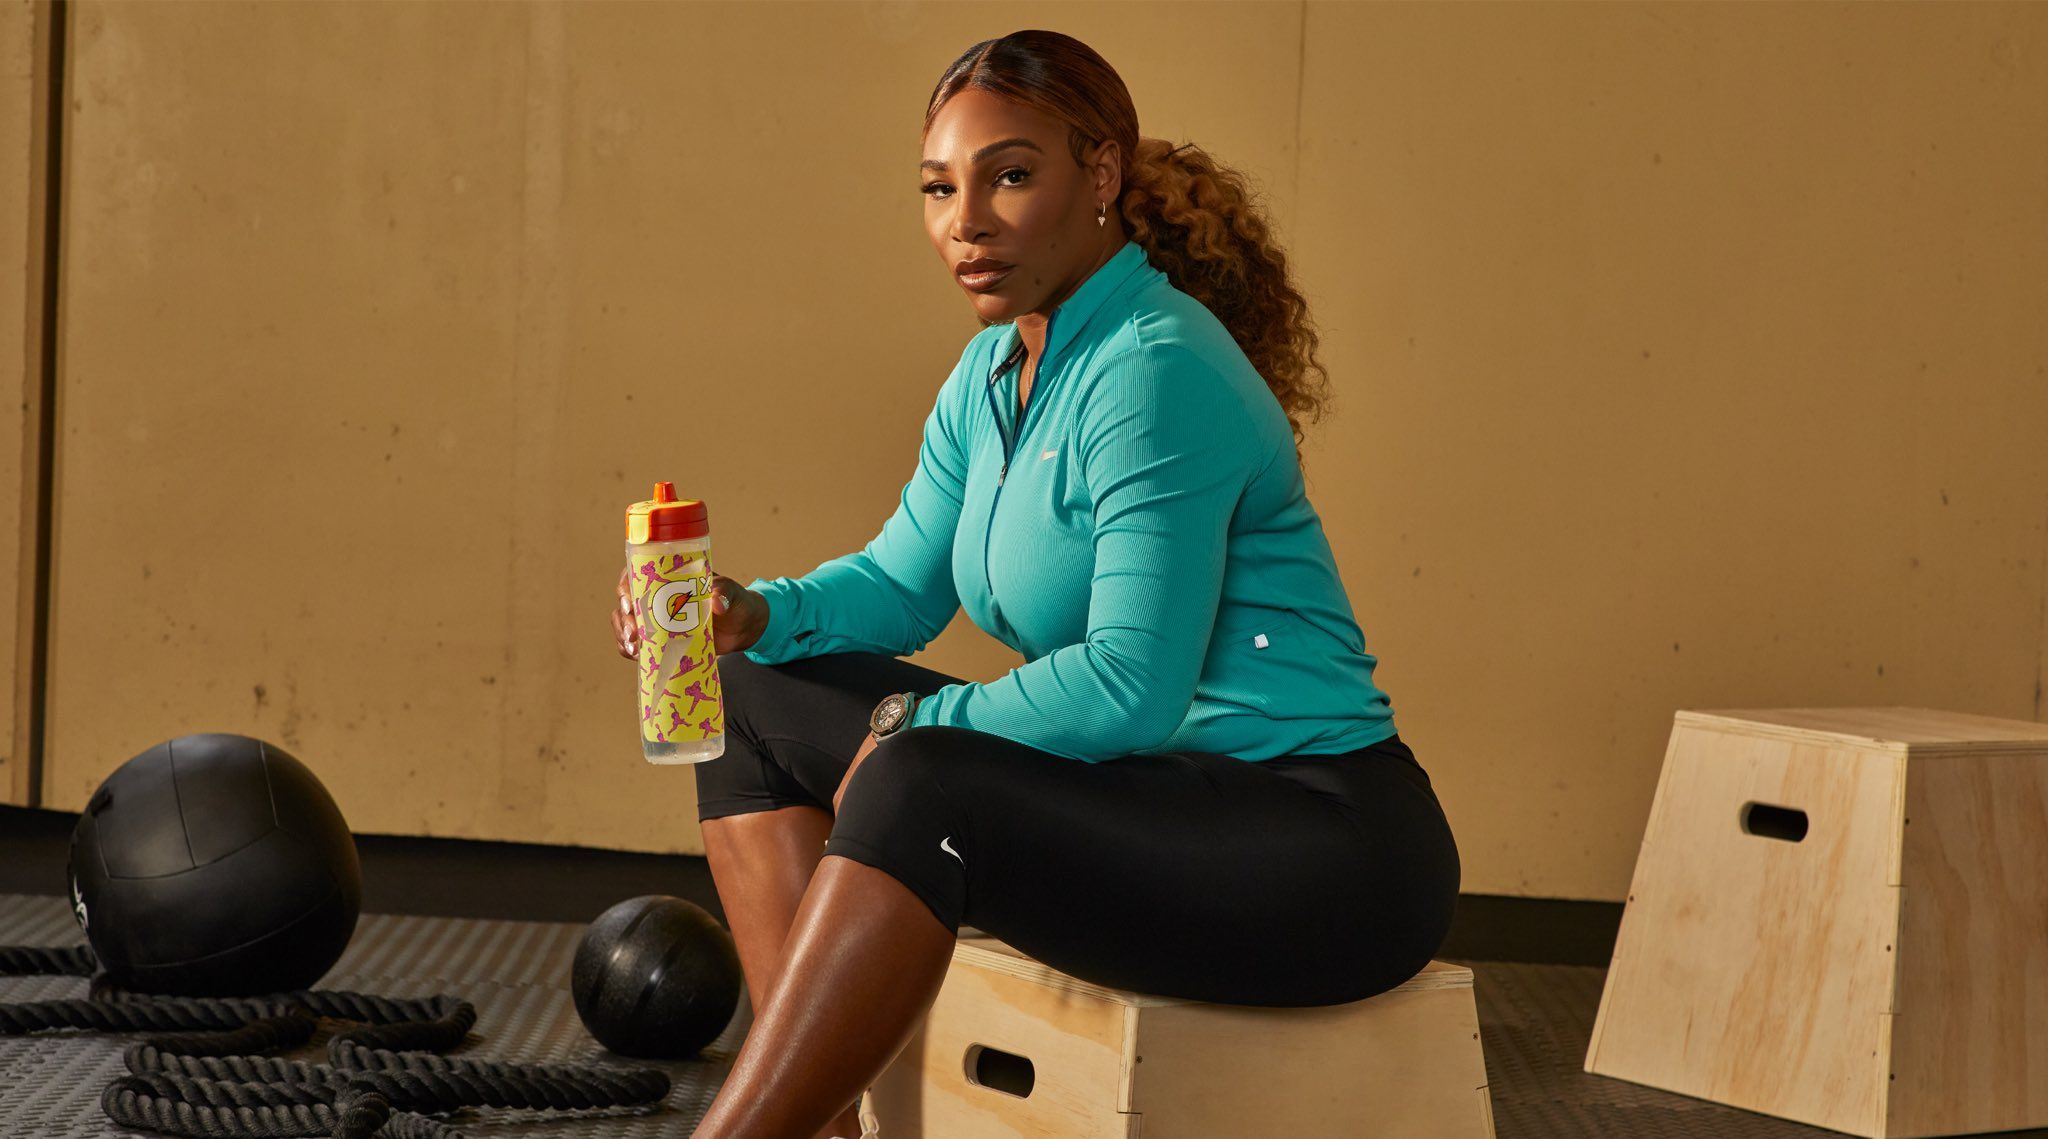 Who is Serena Williams?